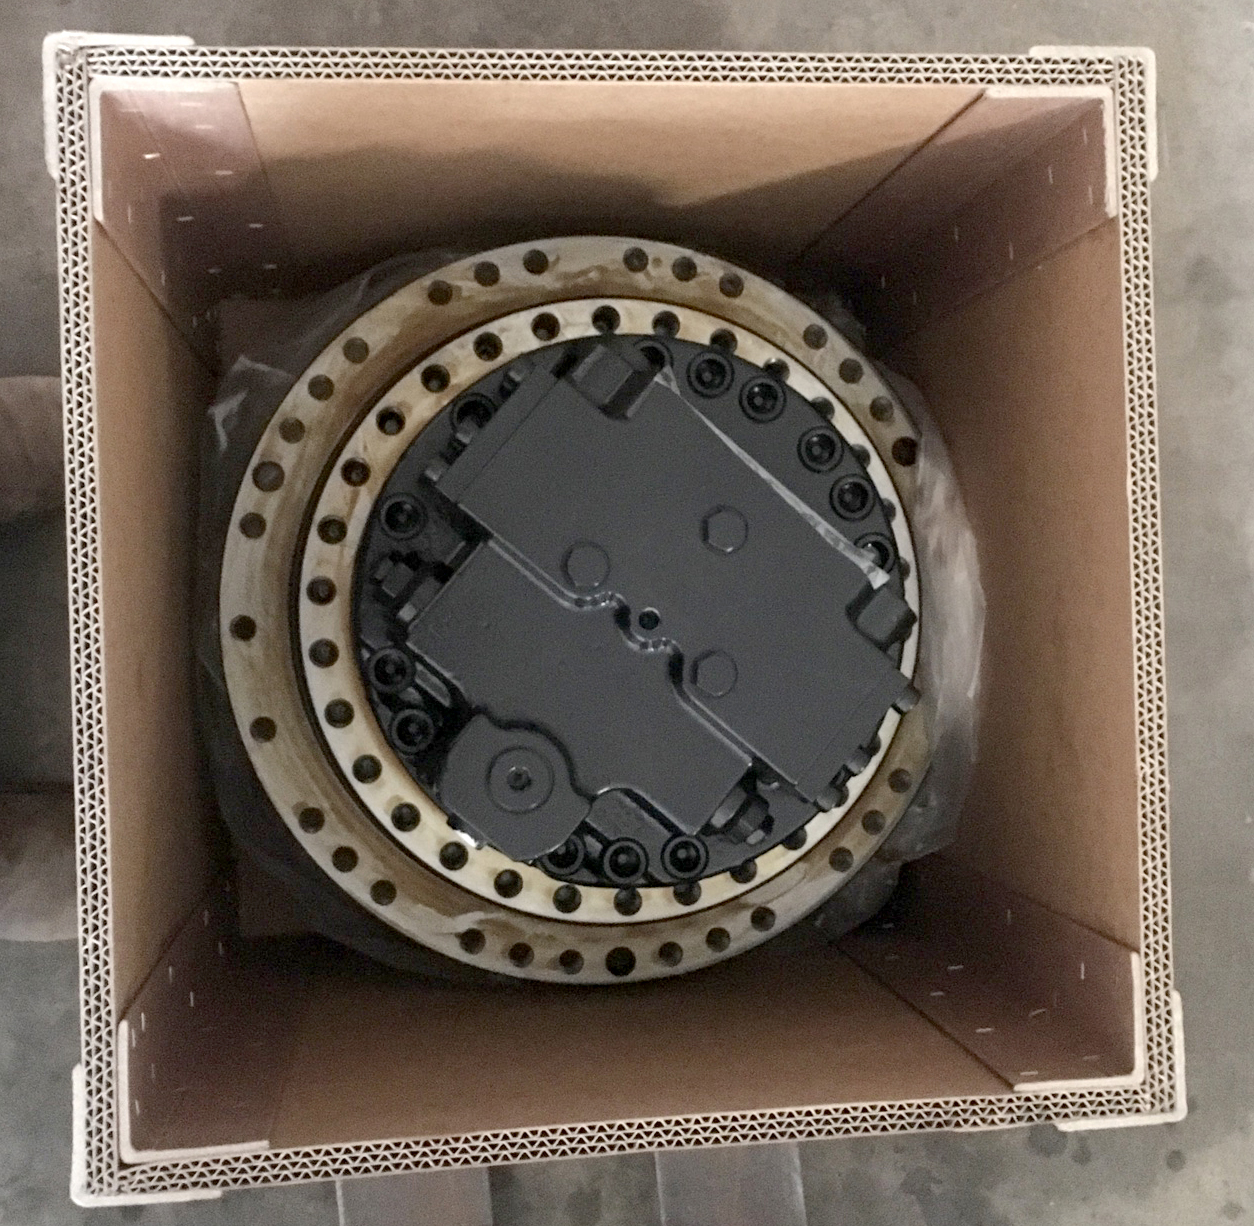 EC240B Final Drive (Planetary/Travel Drive) without Motor Part #